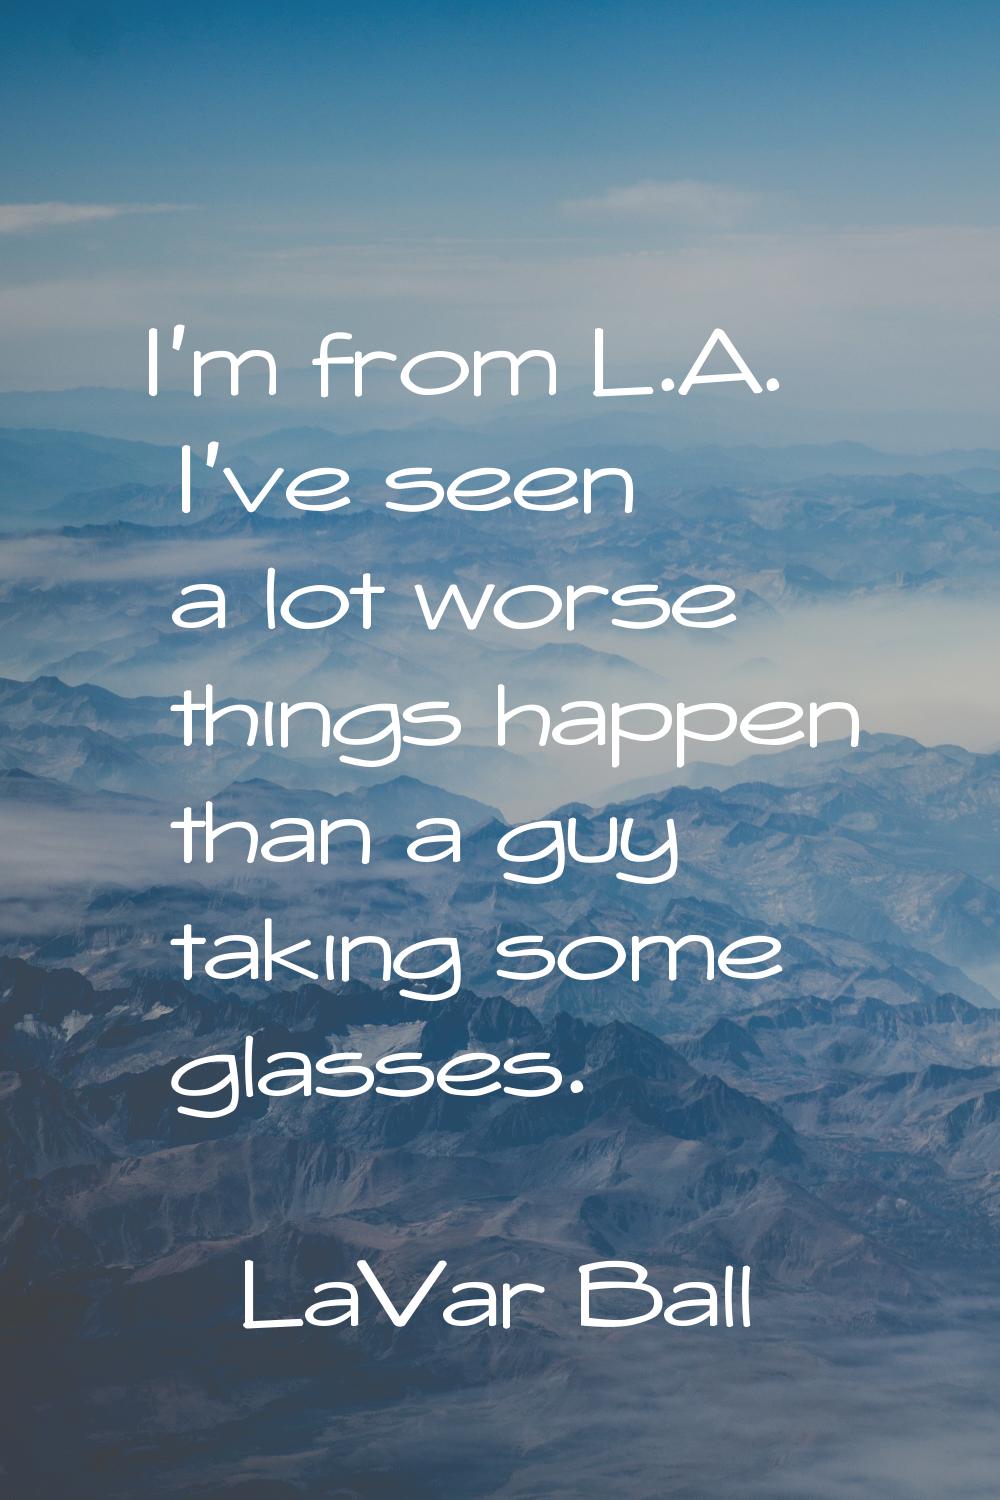 I'm from L.A. I've seen a lot worse things happen than a guy taking some glasses.